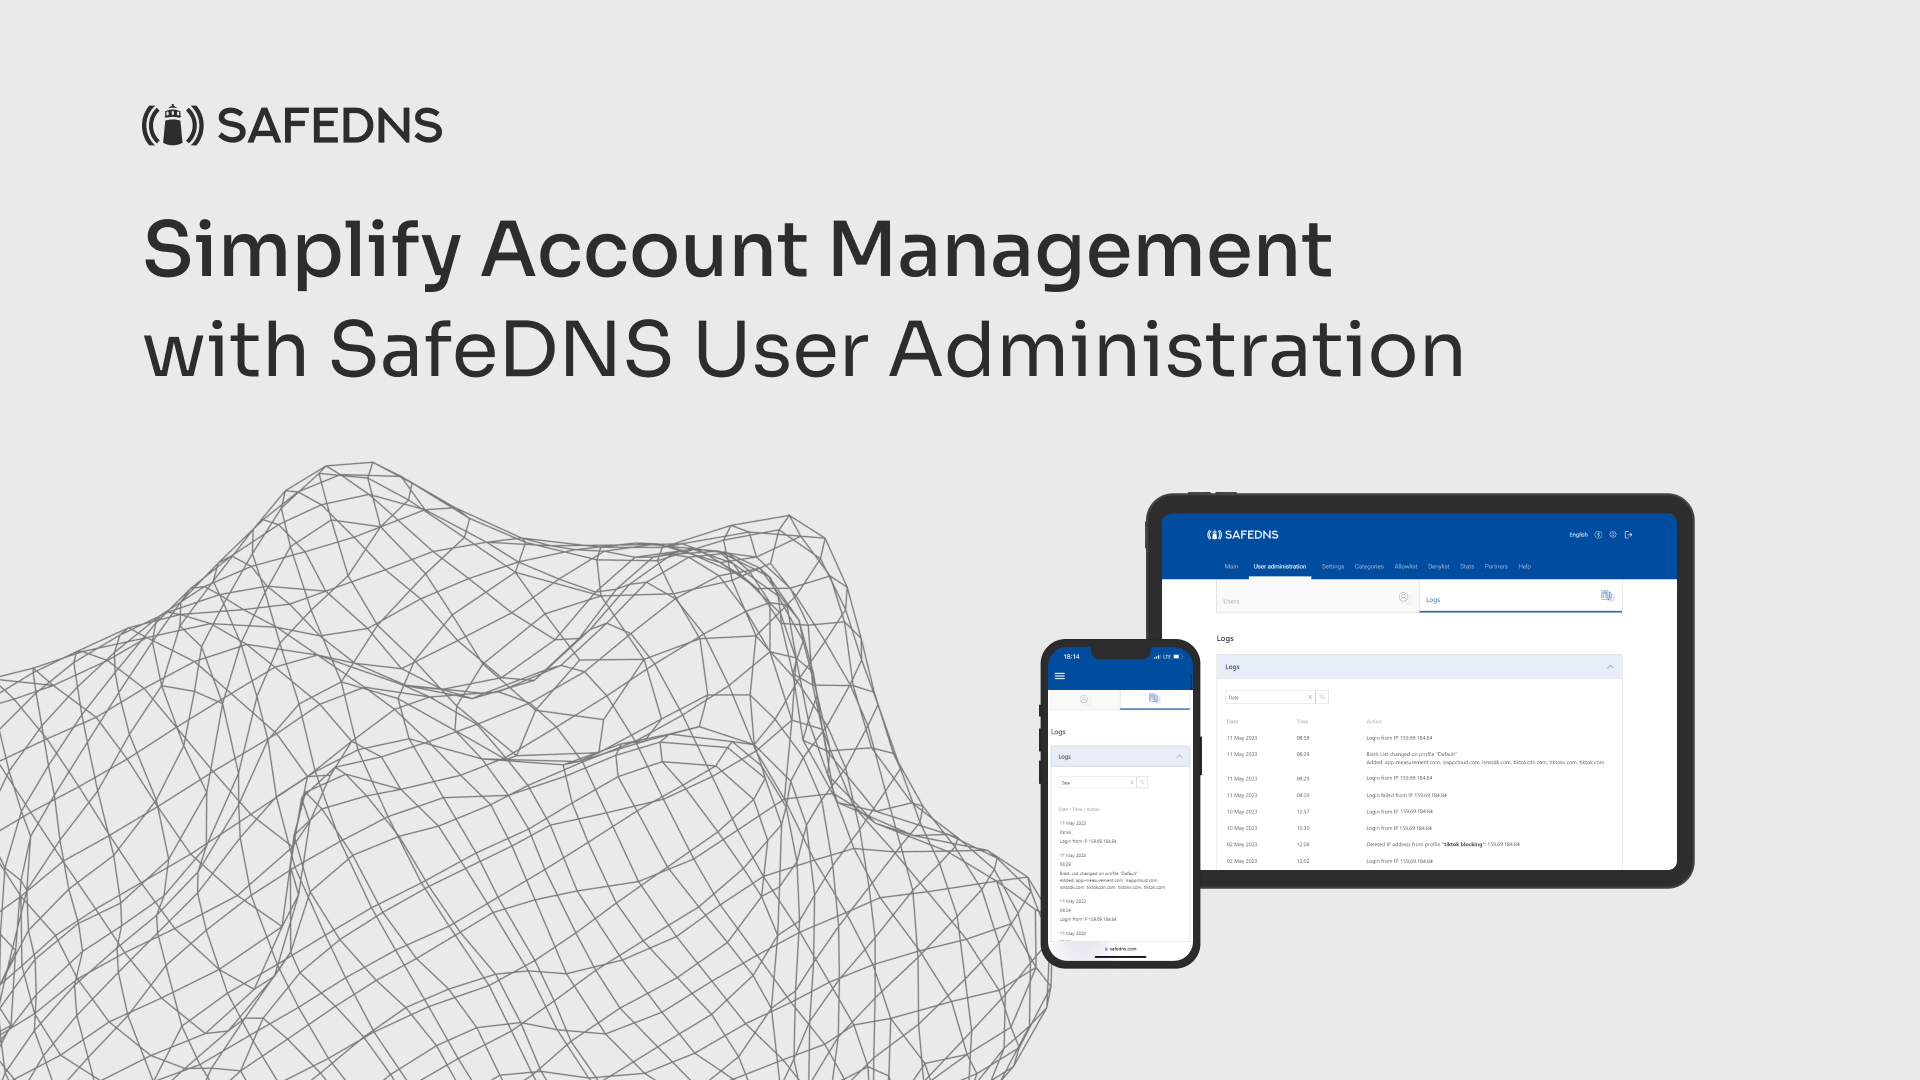 Simplify Account Management with SafeDNS User Administration